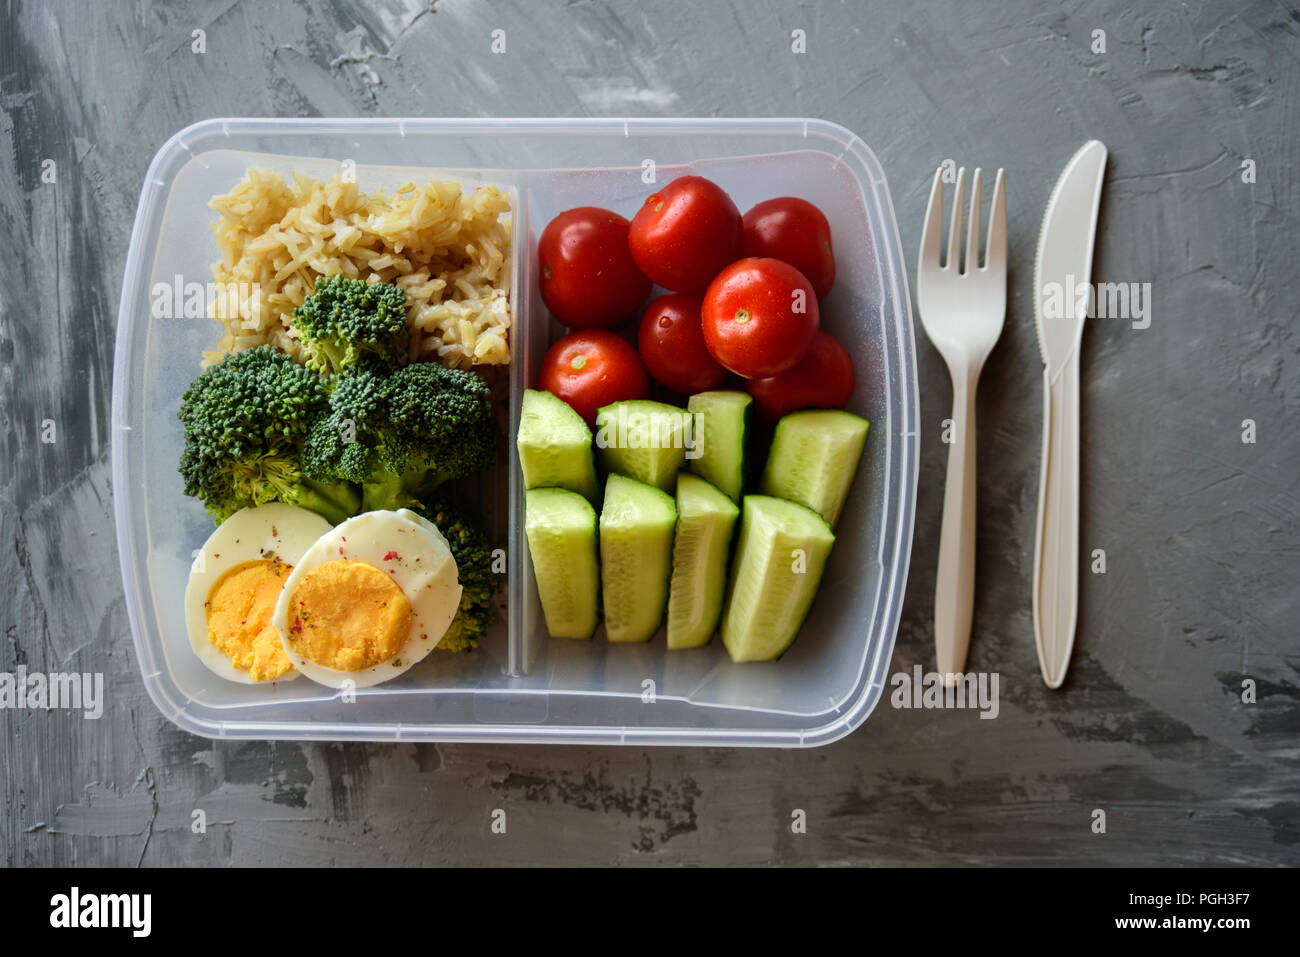 Lunch box with healthy food. Rice, broccoli, tomato, cucumber, eggs, apple and water. On grey concrete background Stock Photo